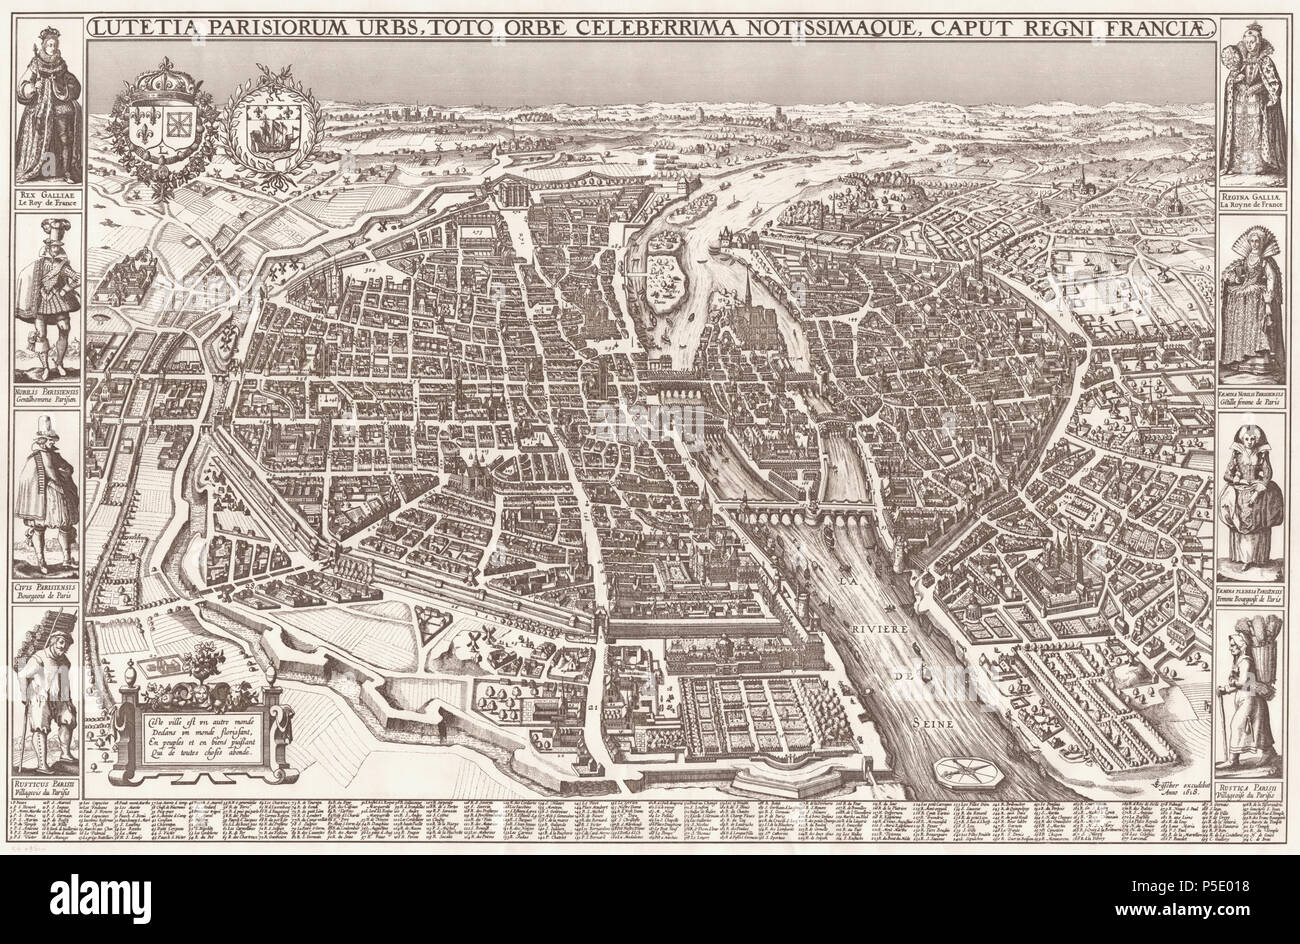 Lutetia Parisorum urbs, toto orbe celeberrima notissimaque, caput regni Franciae. Map of the city of Paris. Scale: ca. 1:2.000. 1618.    Claes Janszoon Visscher II  (1587–1652)     Alternative names Claes Jansz. Visscher (II), Claes Janszoon Visscher, Joannes Piscator, Nicolas Jansz. Visscher (II), Nicolas Joannis Visscher (II)  Description Dutch publisher, printmaker and draughtsman  Date of birth/death 1587 19 June 1652  Location of birth/death Amsterdam Amsterdam  Work period between circa 1601 and circa 1652  Work location Amsterdam  Authority control  : Q1094674 VIAF: 19860086 ISNI: 0000  Stock Photo